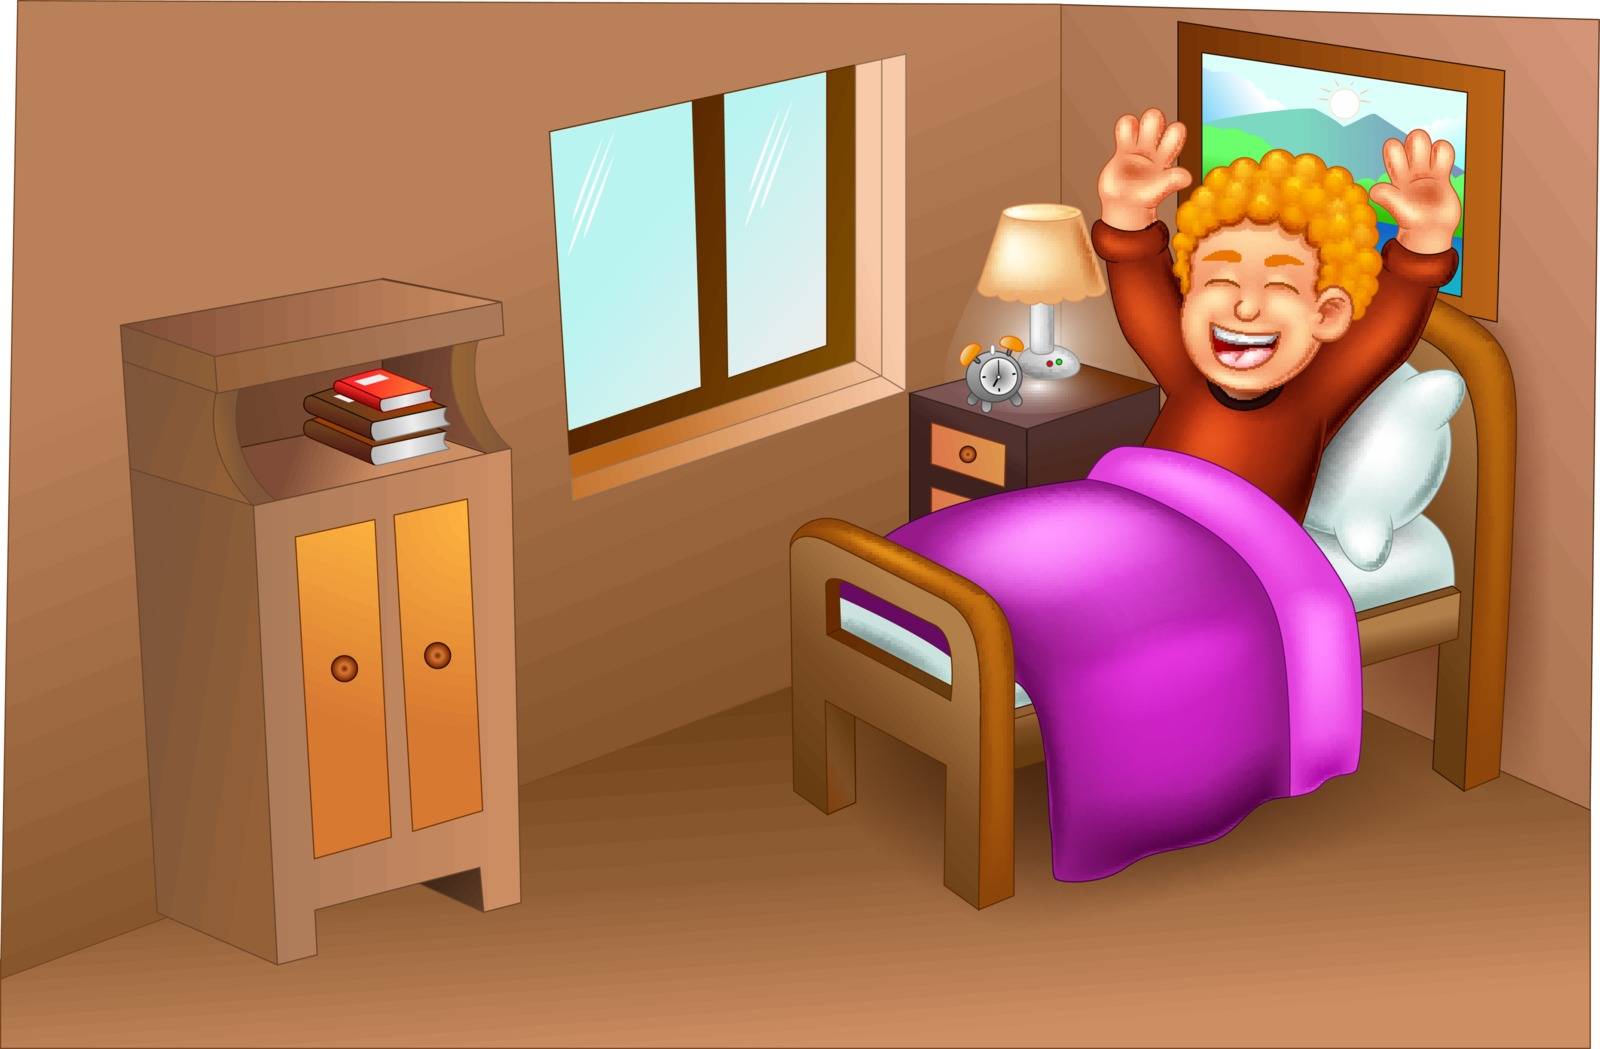 Boy Wake Up In Bedroom Cartoon for your design